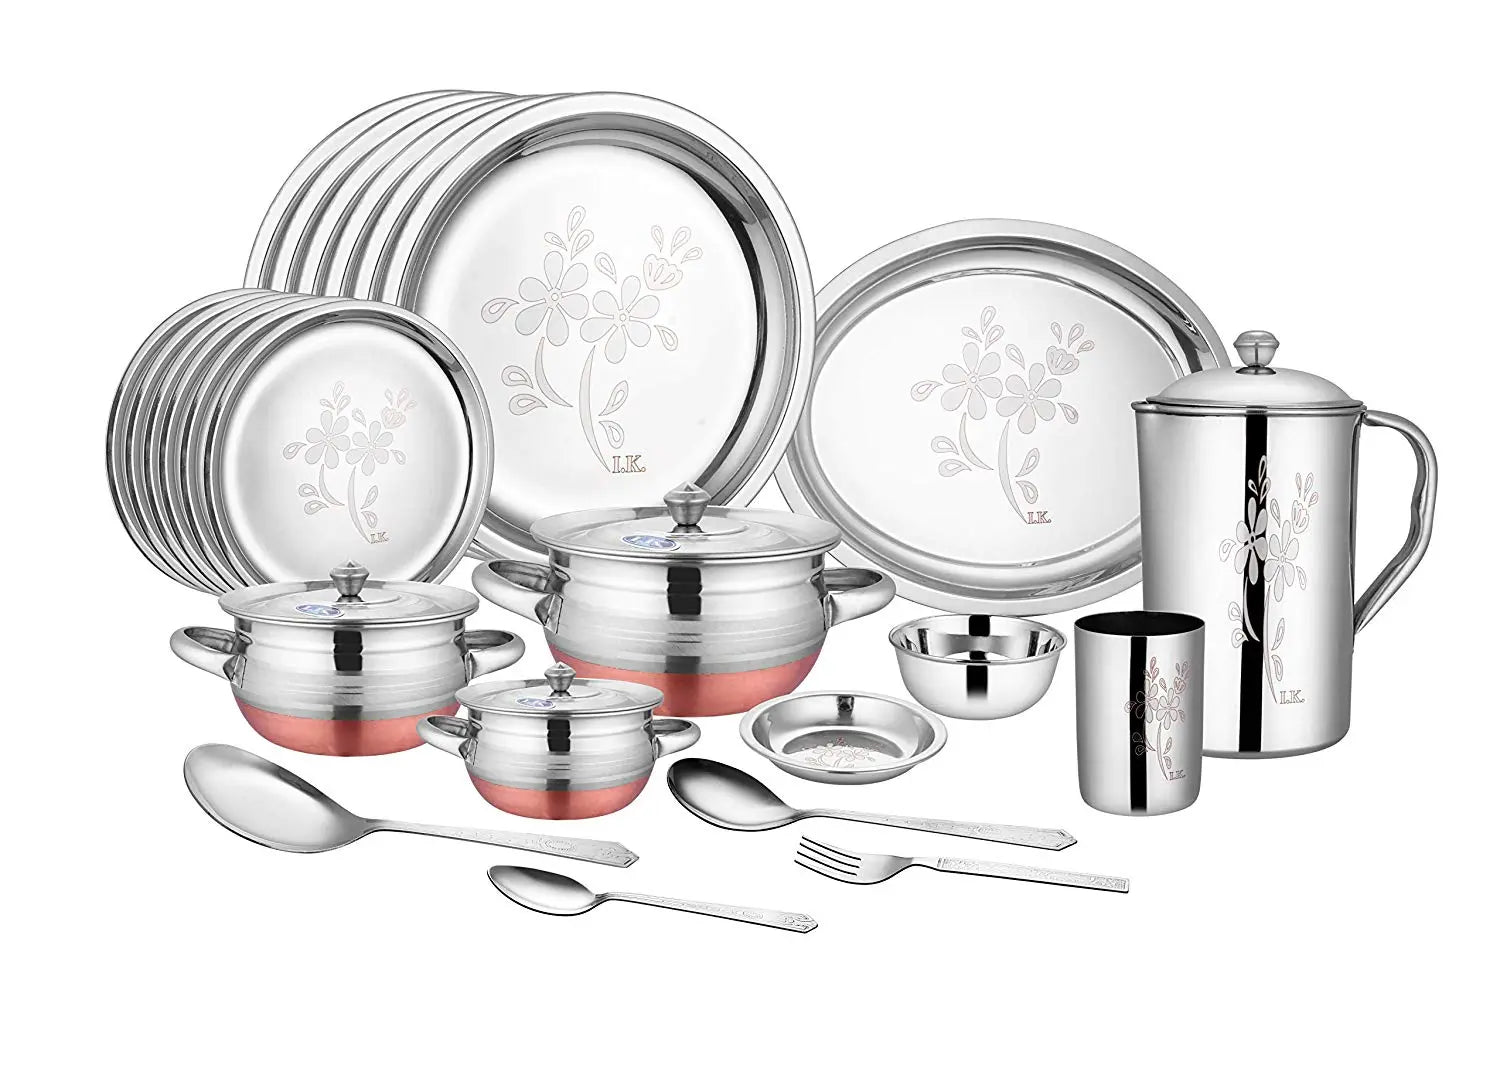 CROCKERY WALA AND COMPANY Laser Finish Stainless Steel Dinner Set, 63 Pieces, Silver - Crockery Wala And Company